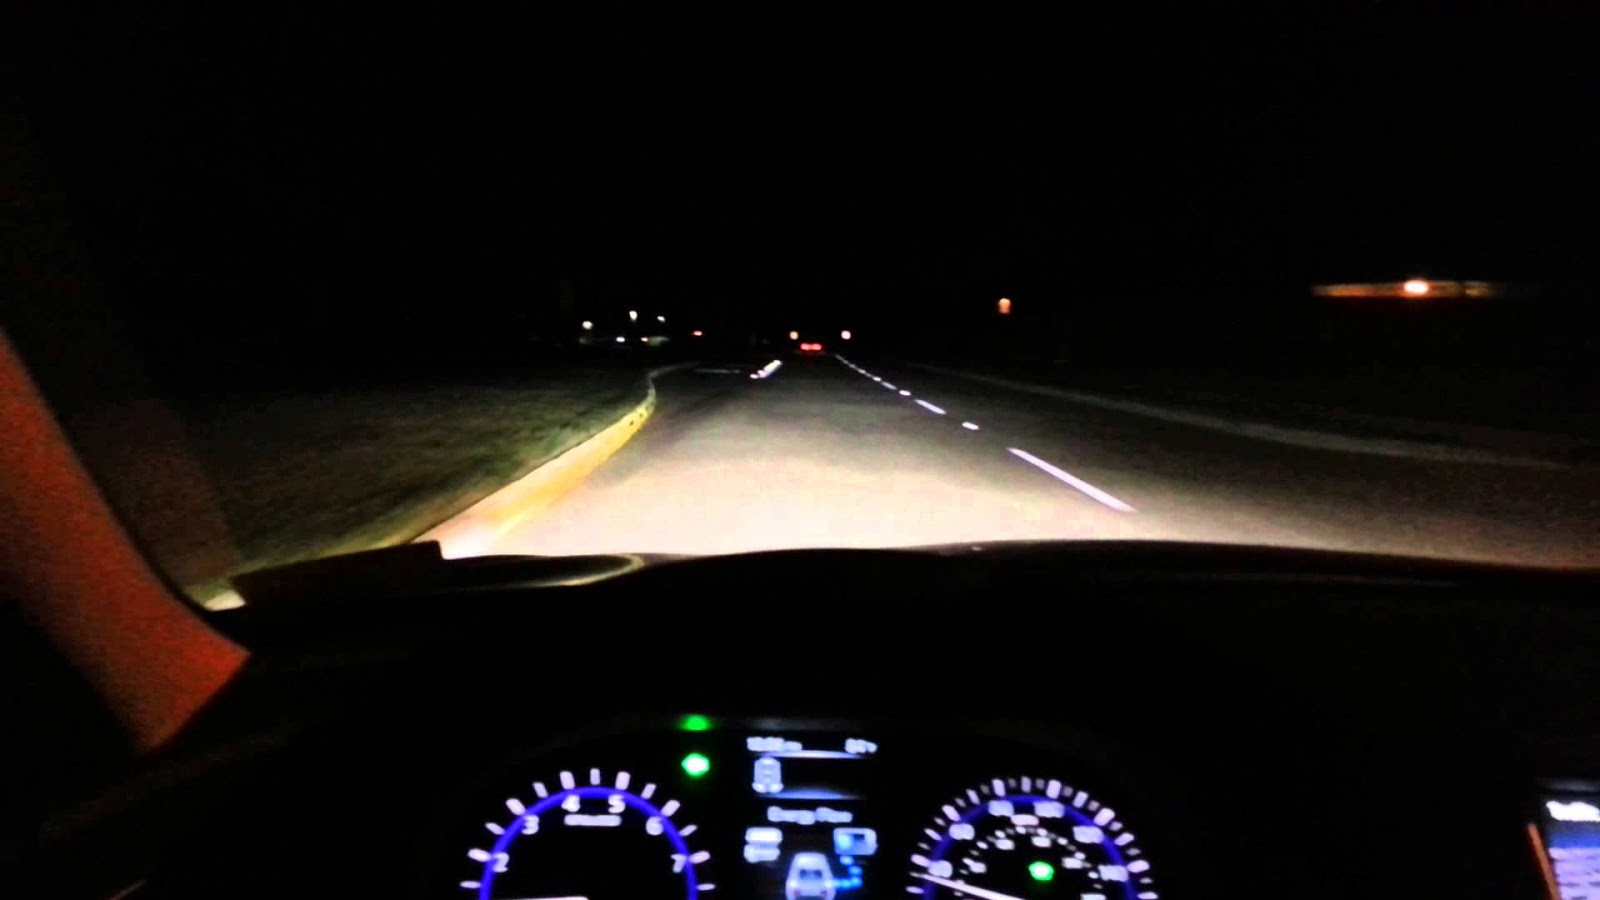 Nighttime Driving Worries: Do You Want to See Better At Night?